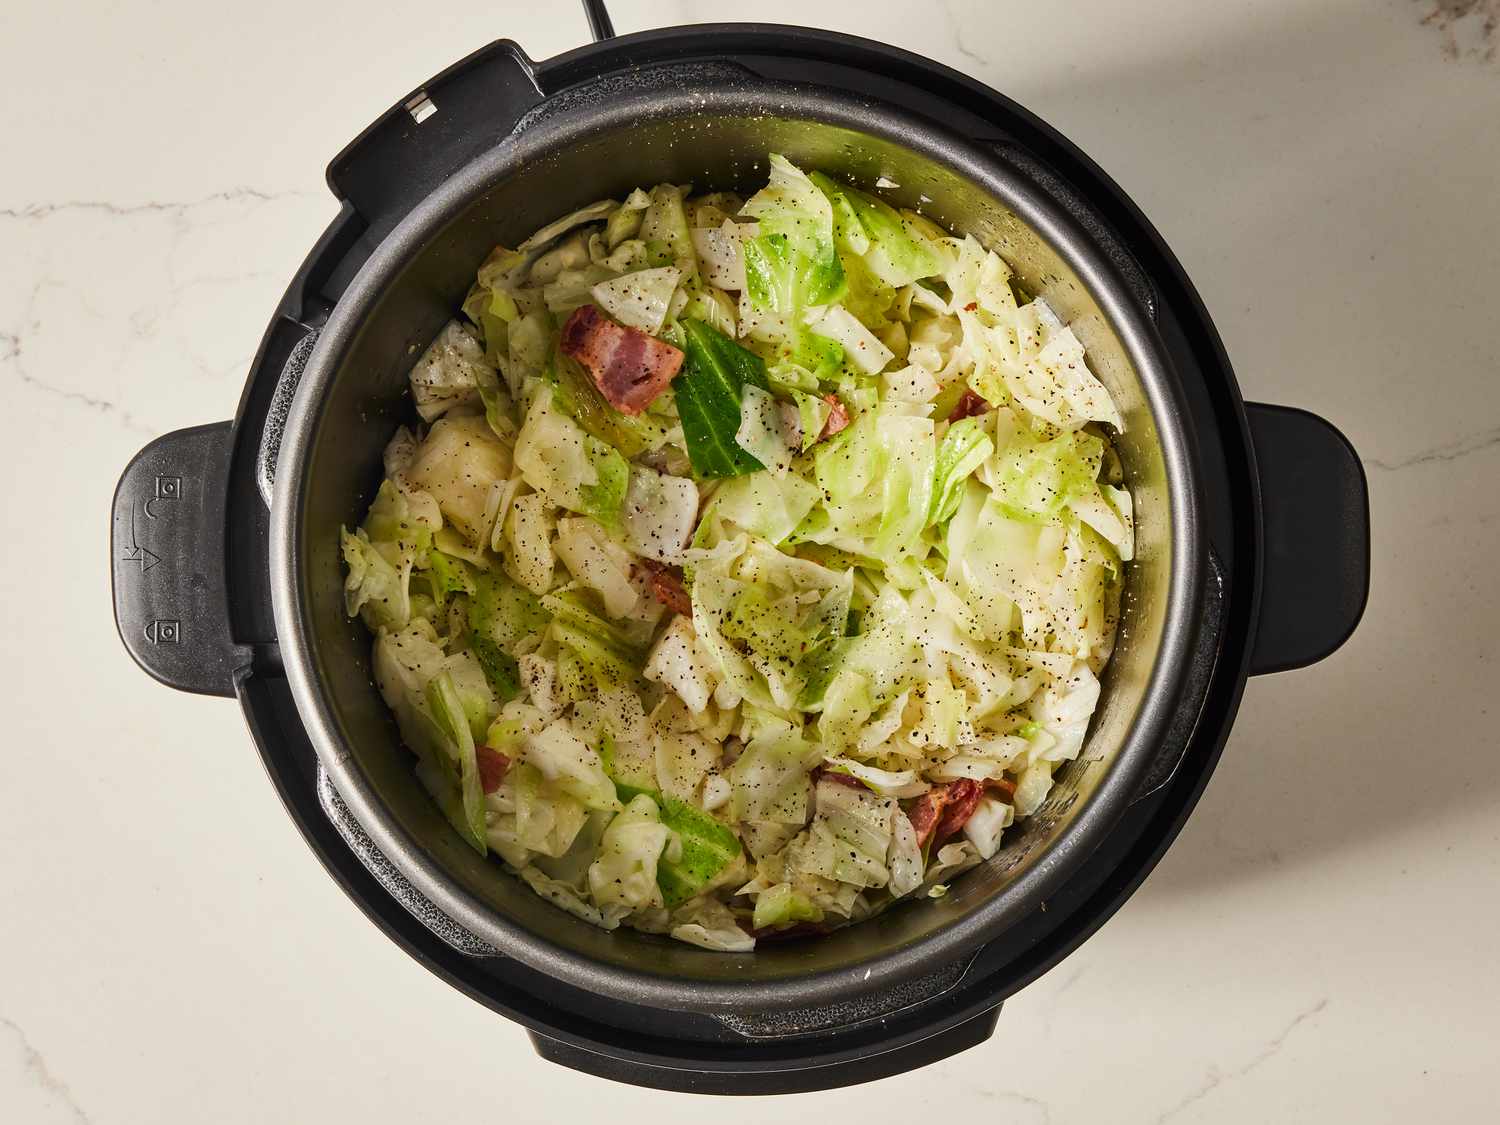 How To Cook Cabbage In Electric Pressure Cooker